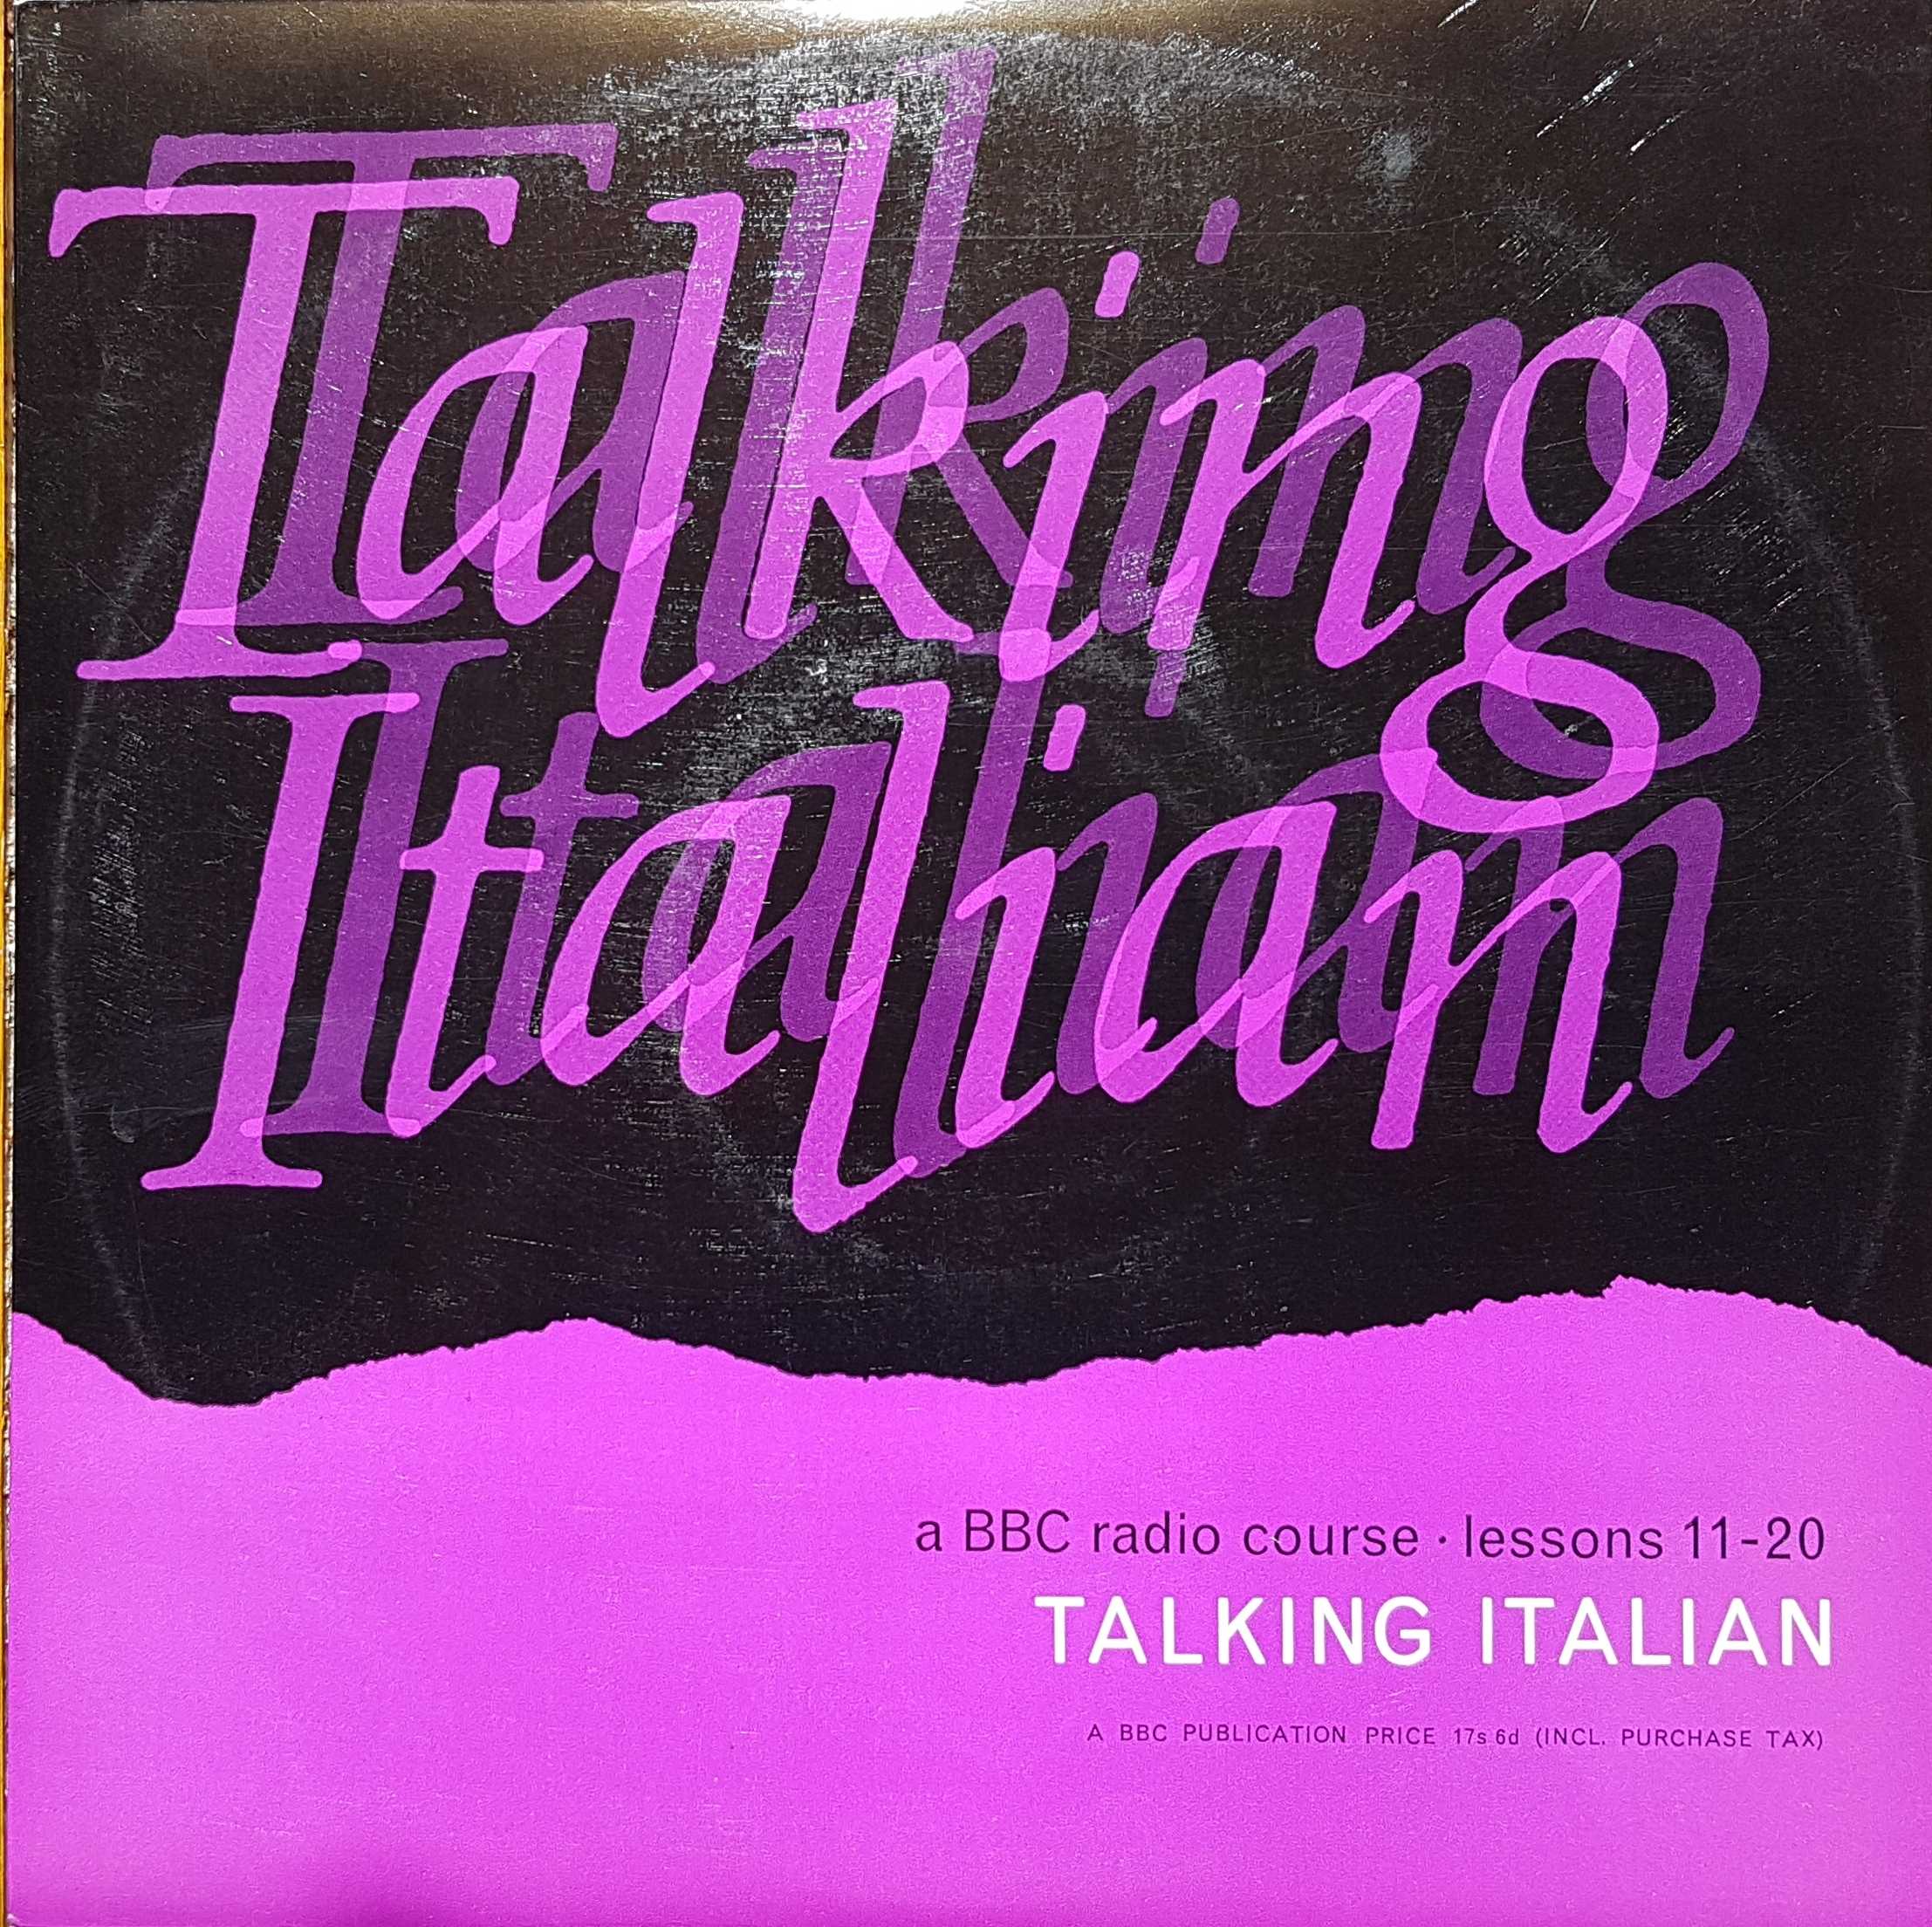 Picture of OP 33/34 Talking Italian - Lessons 11 - 20 by artist Pietro Giorgetti from the BBC albums - Records and Tapes library